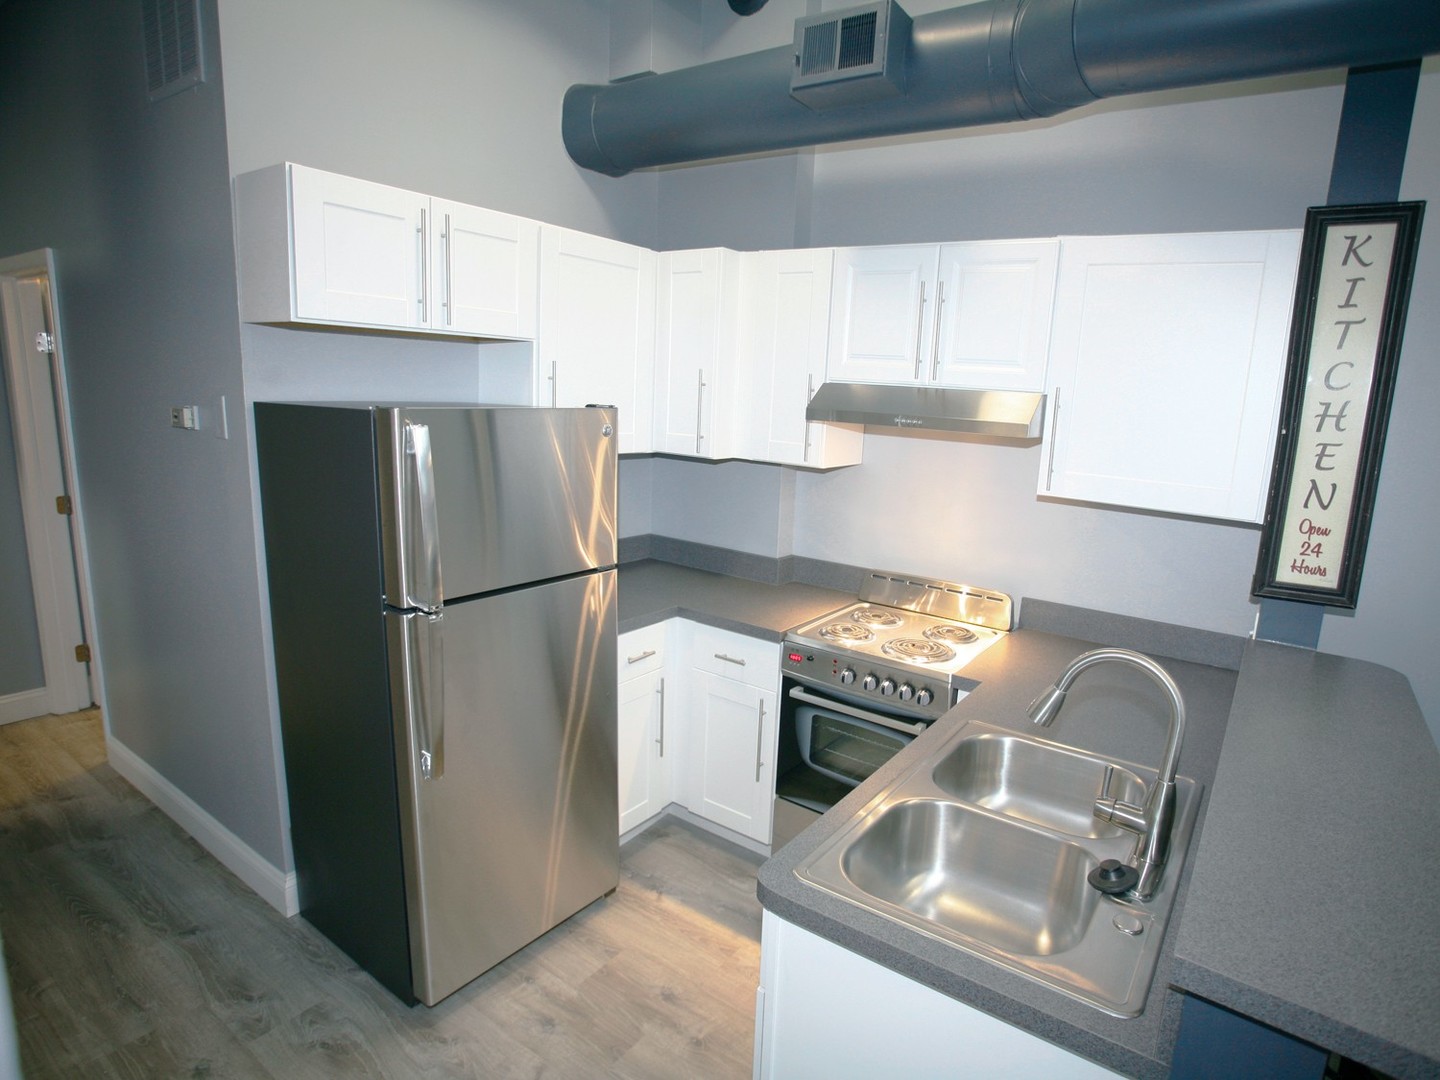 1 & 2 Bed Apartment Units for Rent | Cleveland | Ohio #44103 Image